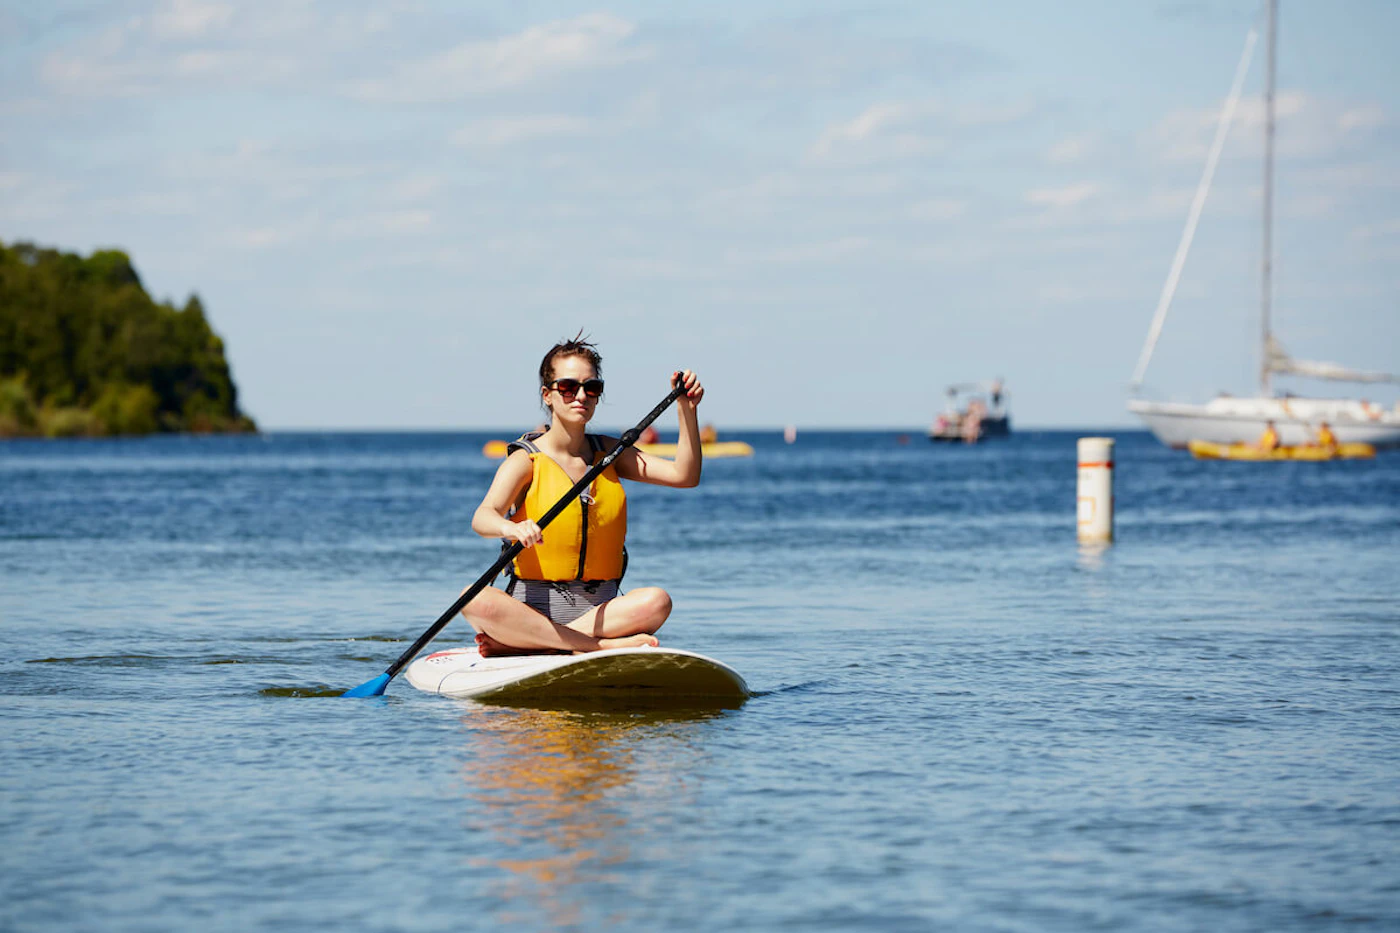 A woman paddle boards in Peninsula State Park in Door County. The county's tourism bureau expects a busy Memorial Day weekend as people begin to travel again after a year of staying put during the pandemic. (Photo courtesy of John Nienhuis/Destination Door County)